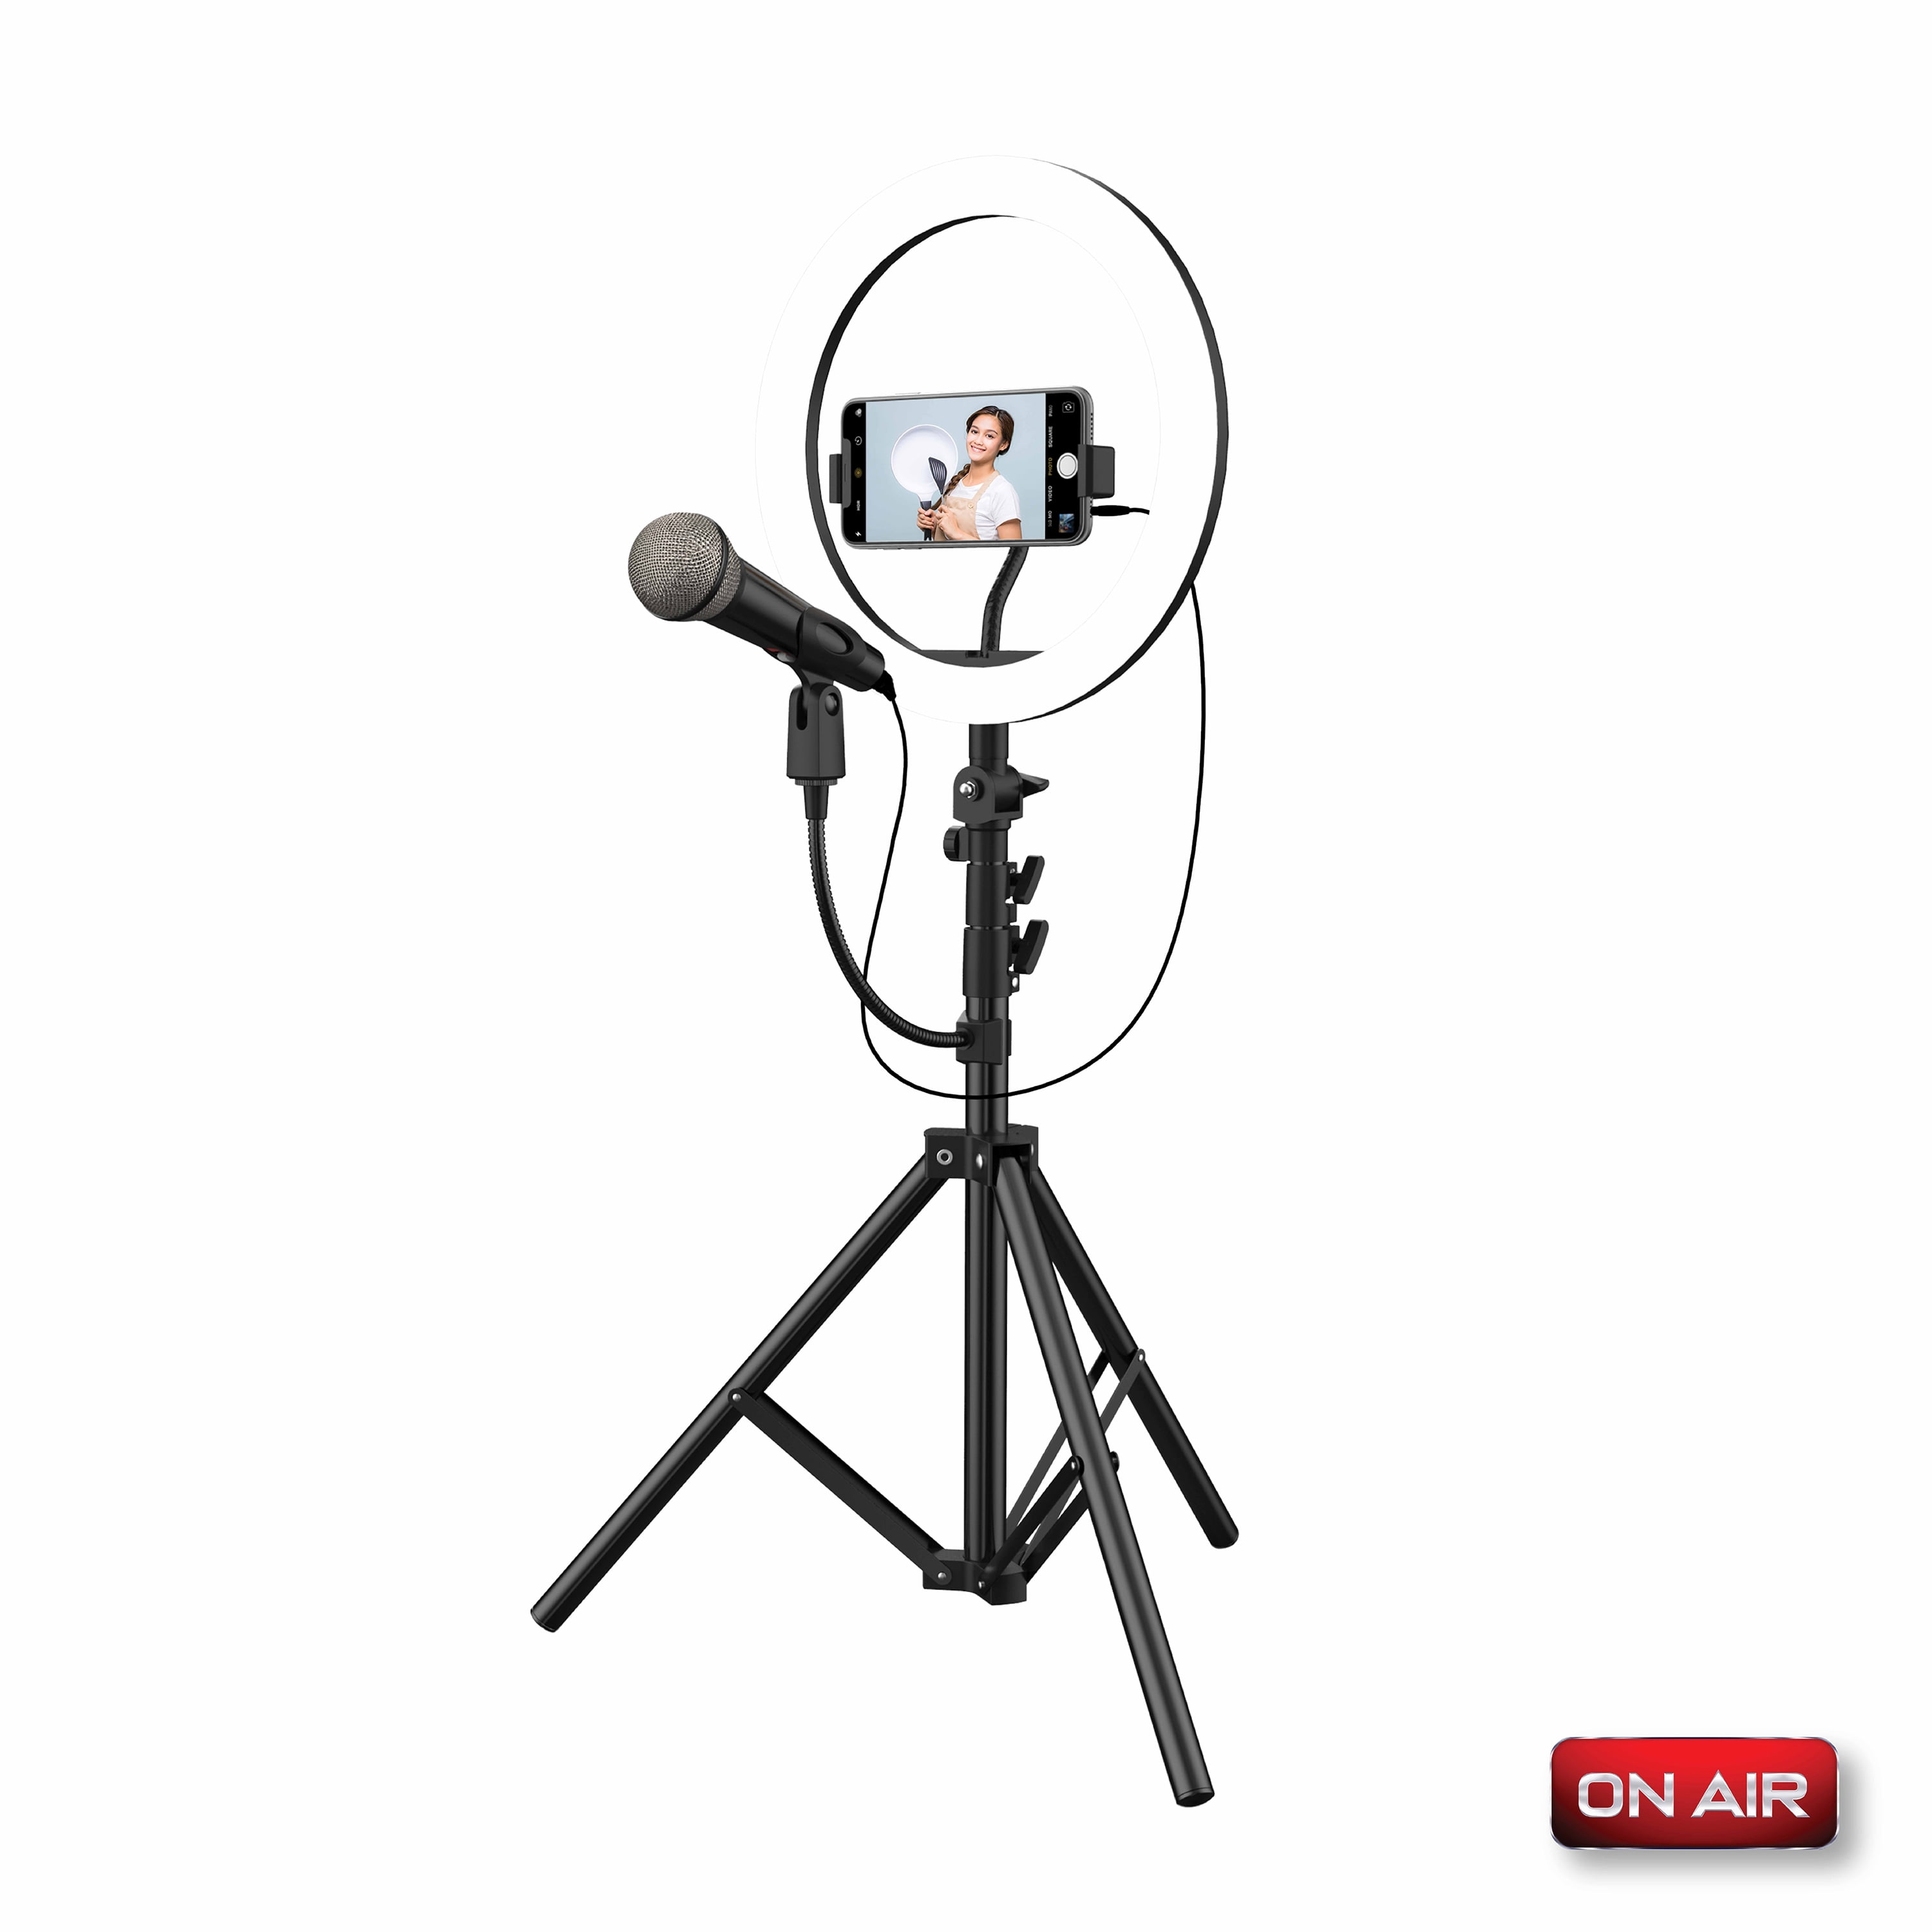 IK Multimedia iRig Video Creation Bundle, 10 LED Ring Light with  Adjustable Color, Phone Tripod Stand & Microphone HD, All Smartphone  Compatiblity